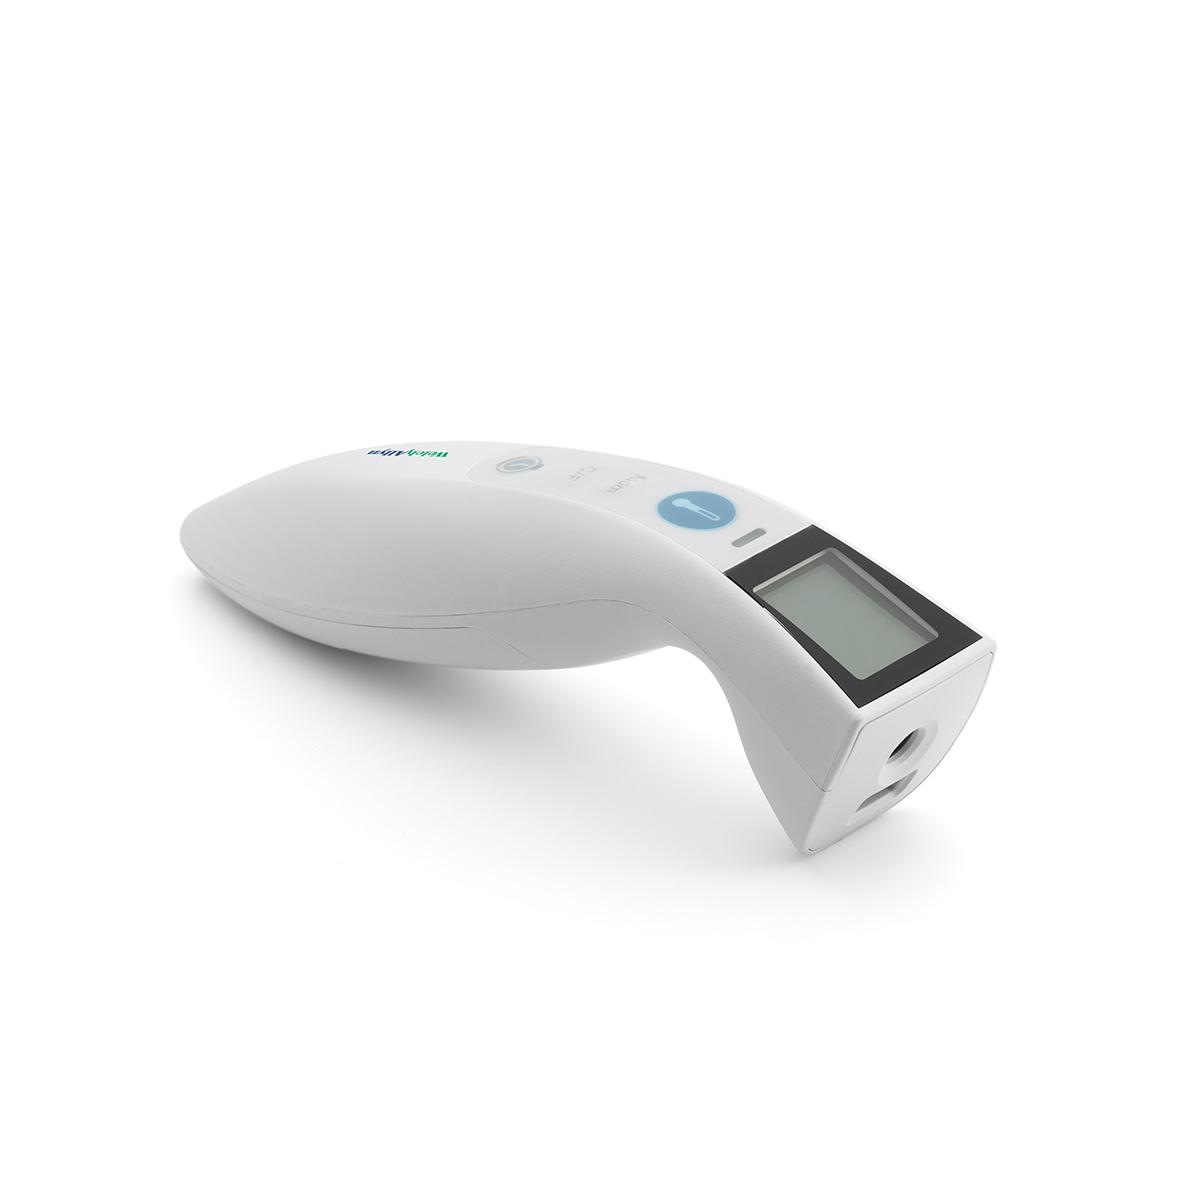 CareTemp™ Touch Free Thermometer Welch Allyn